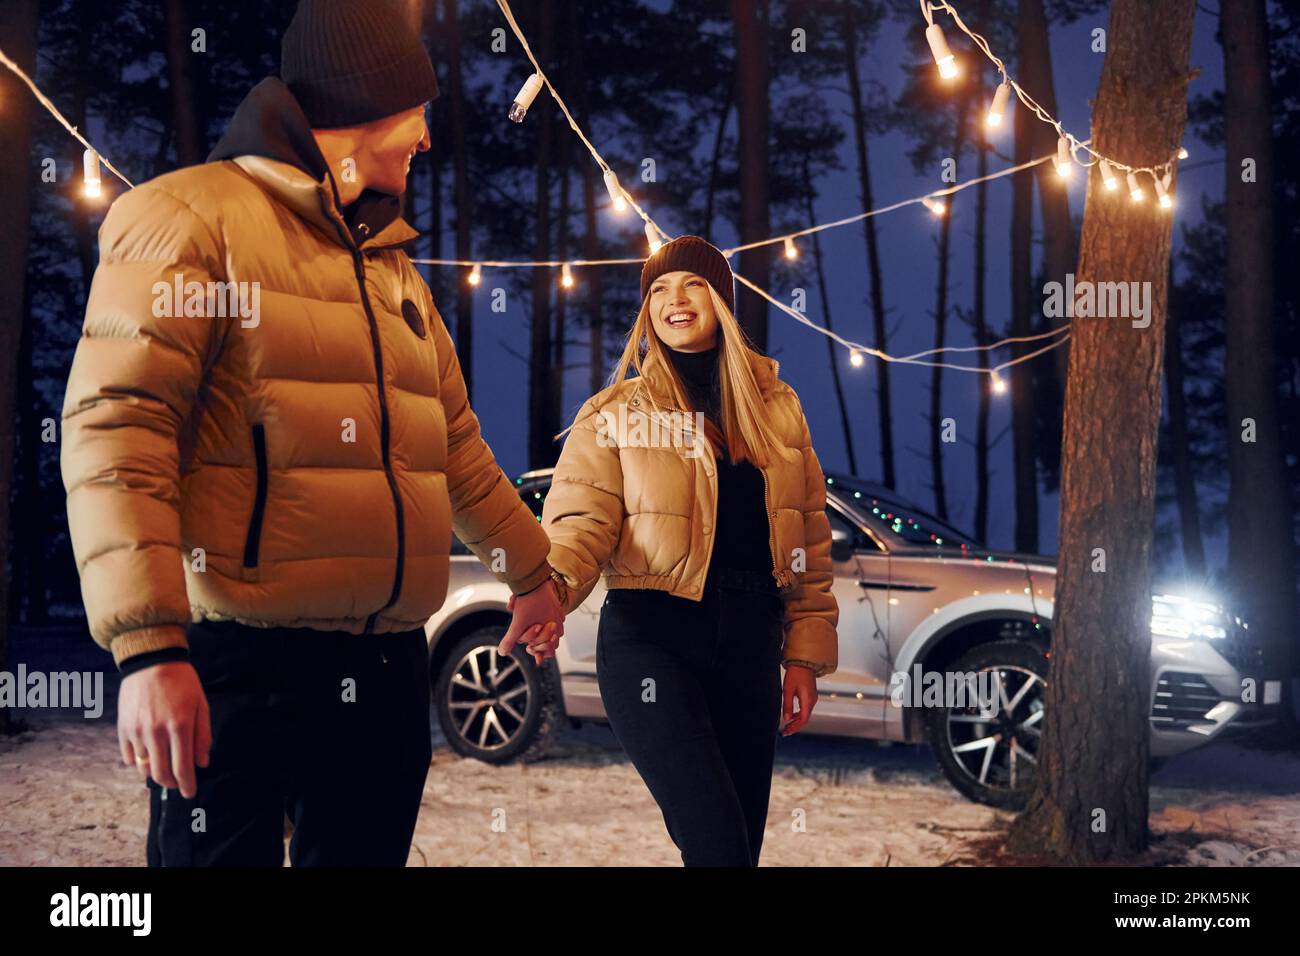 Automobile parked behind. Couple standing in the forest and celebrating New year. Stock Photo